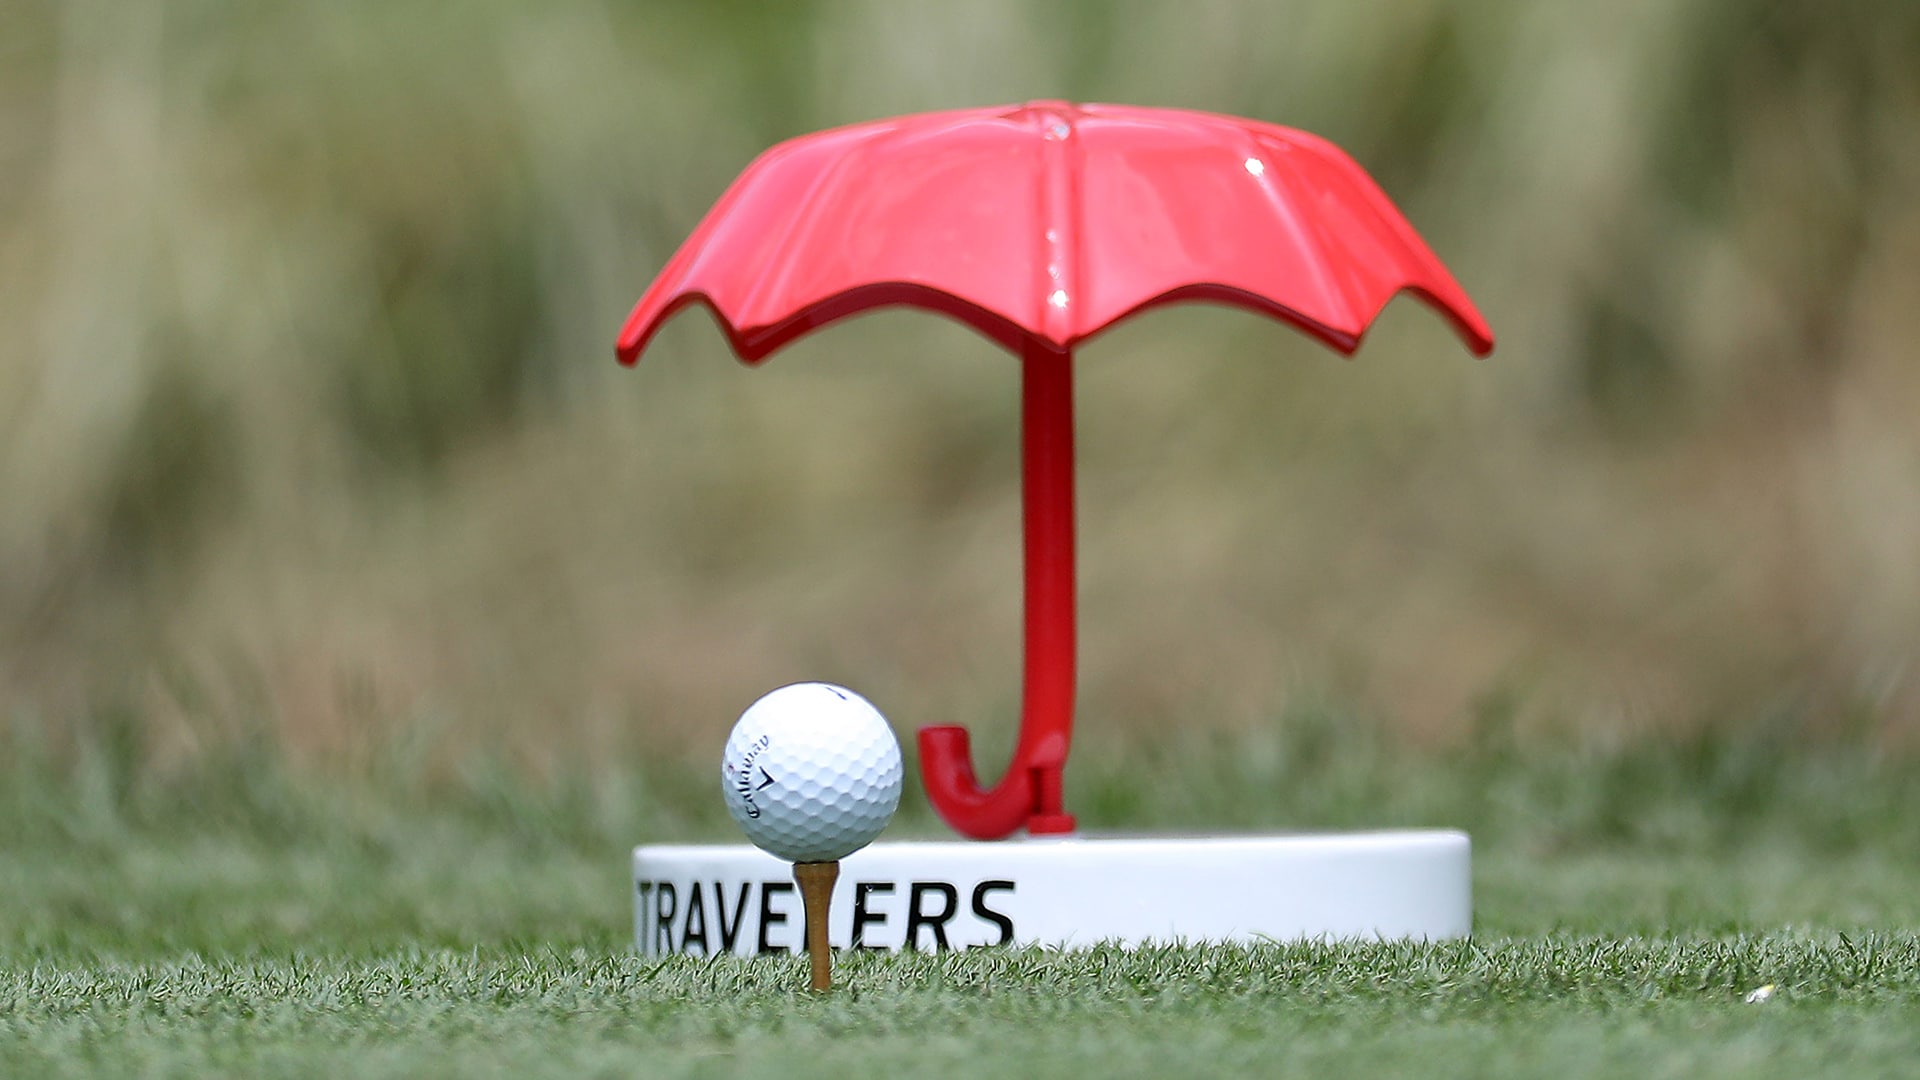 Third round pushed up with expected inclement weather at Travelers Championship